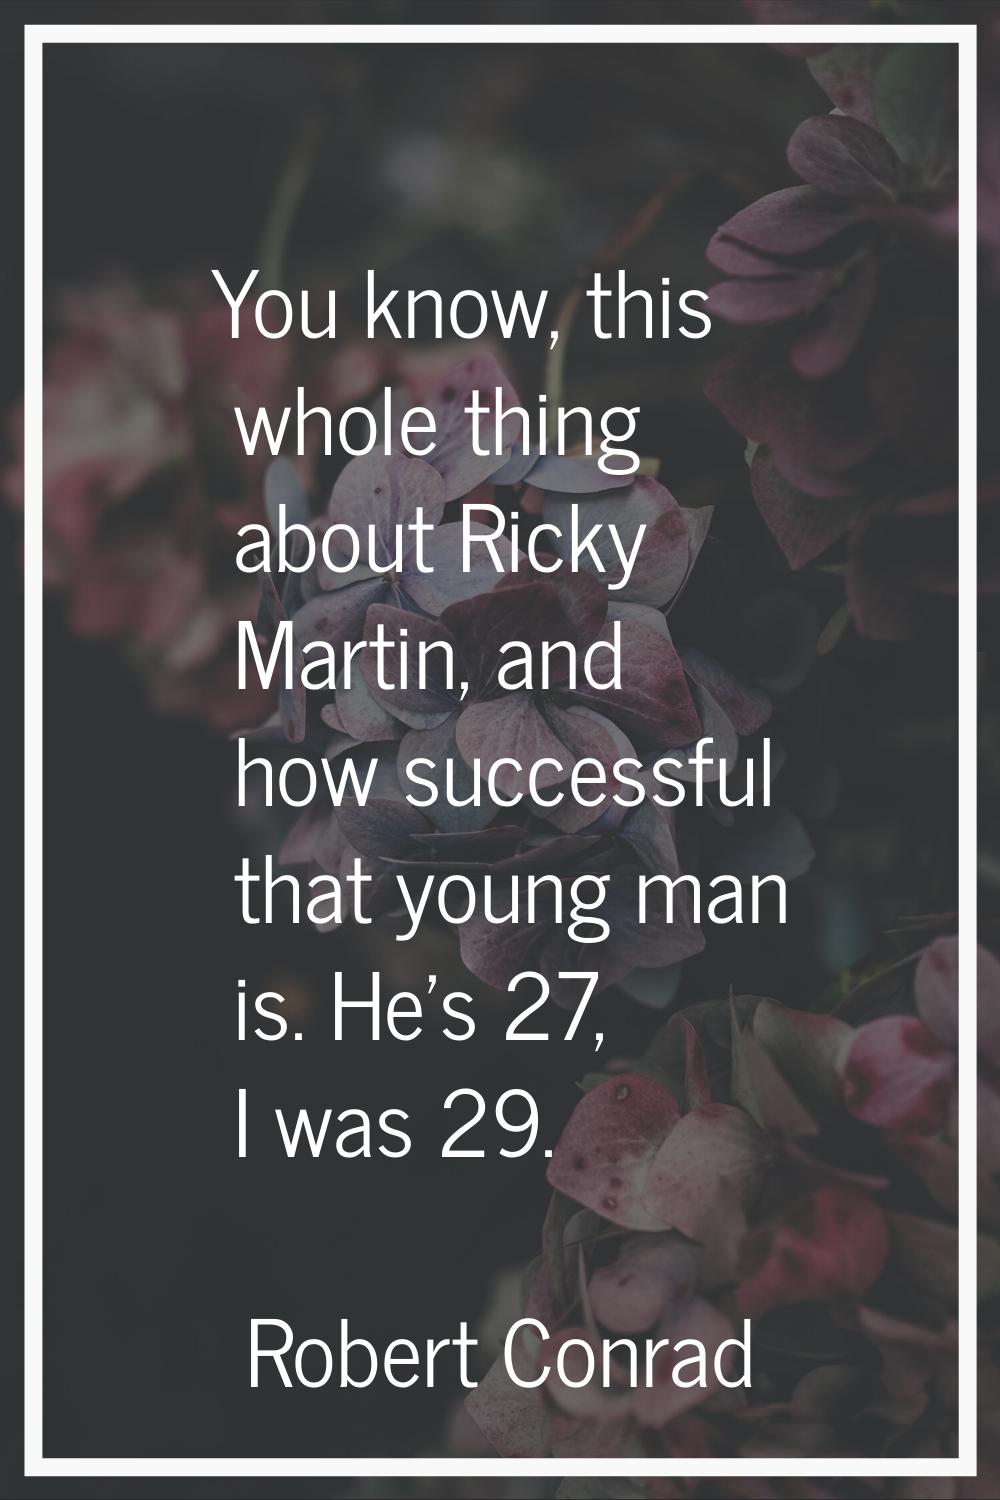 You know, this whole thing about Ricky Martin, and how successful that young man is. He's 27, I was